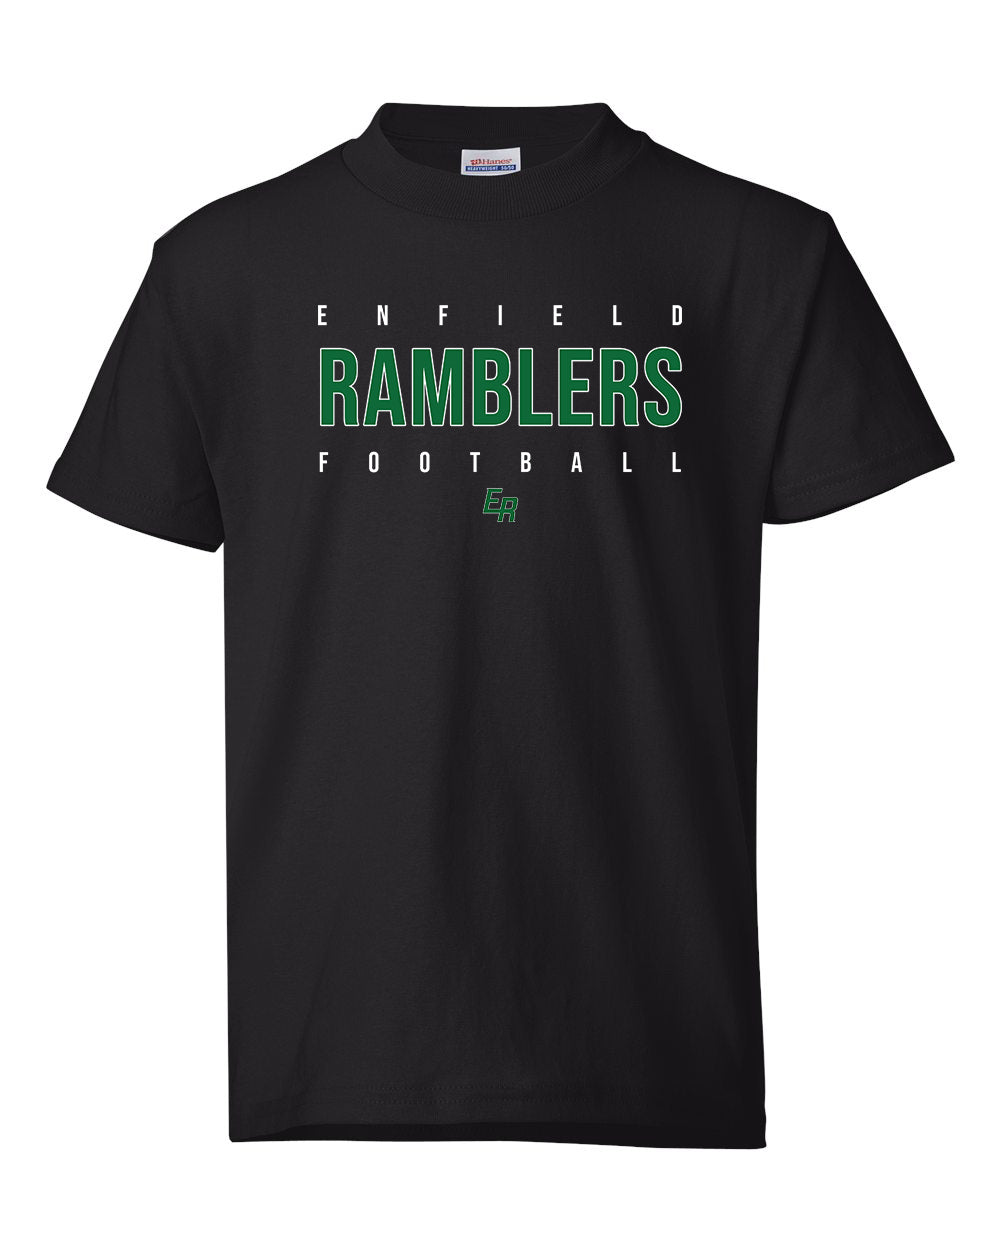 Ramblers Adult T-Shirt 50/50 - 29MR (color options available)